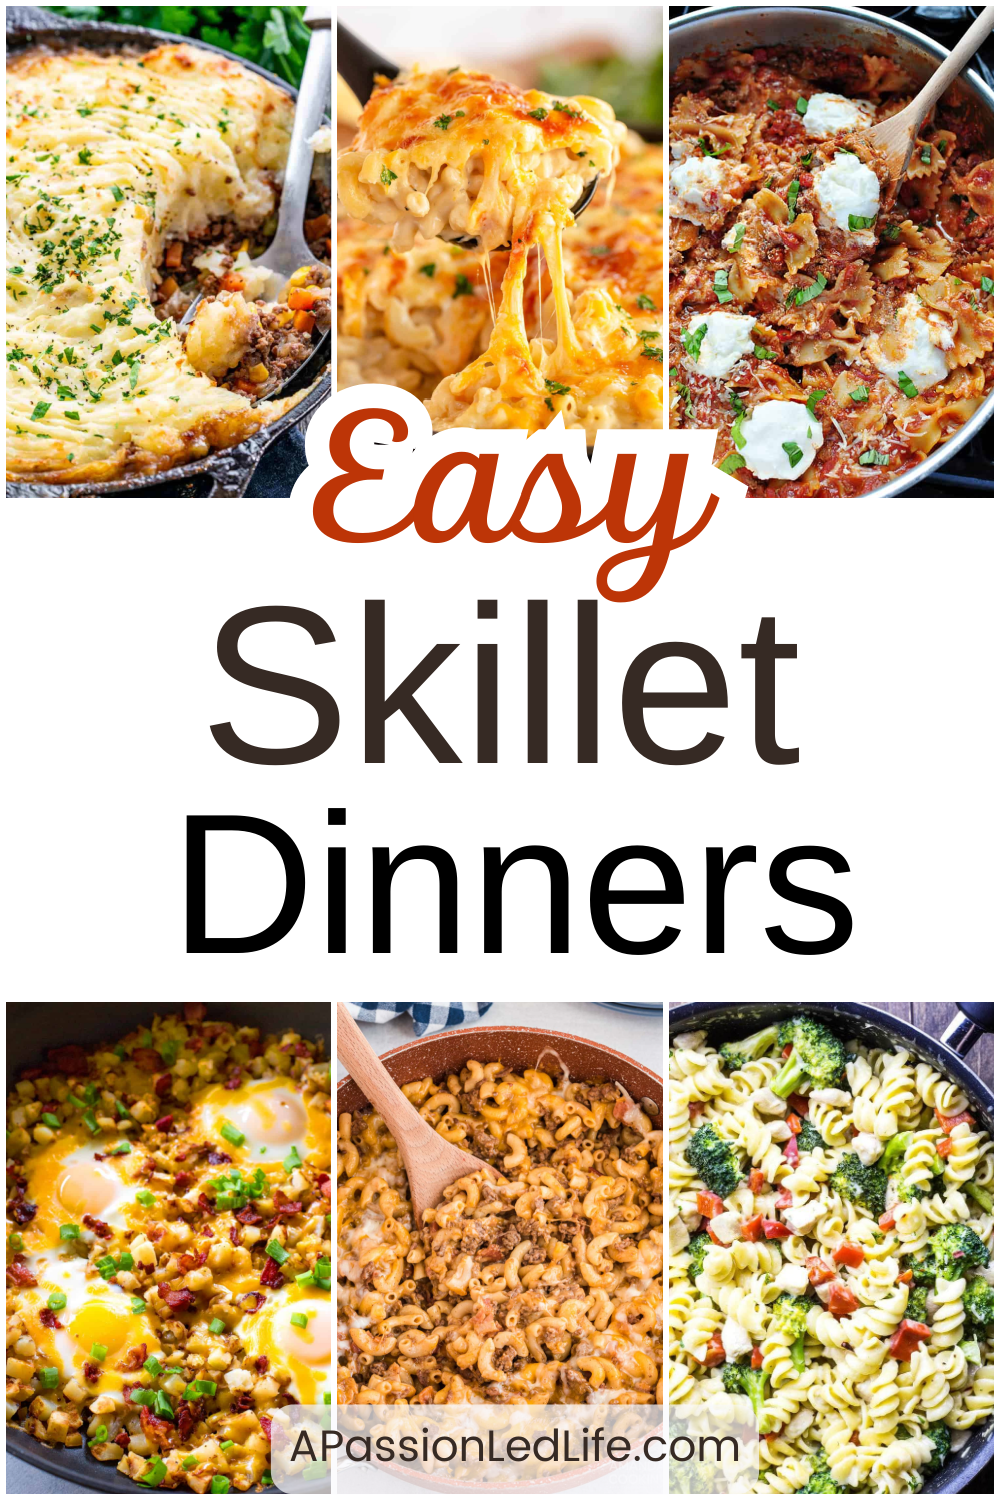 photo collage with text overlay that reads "Easy Skillet Dinners"